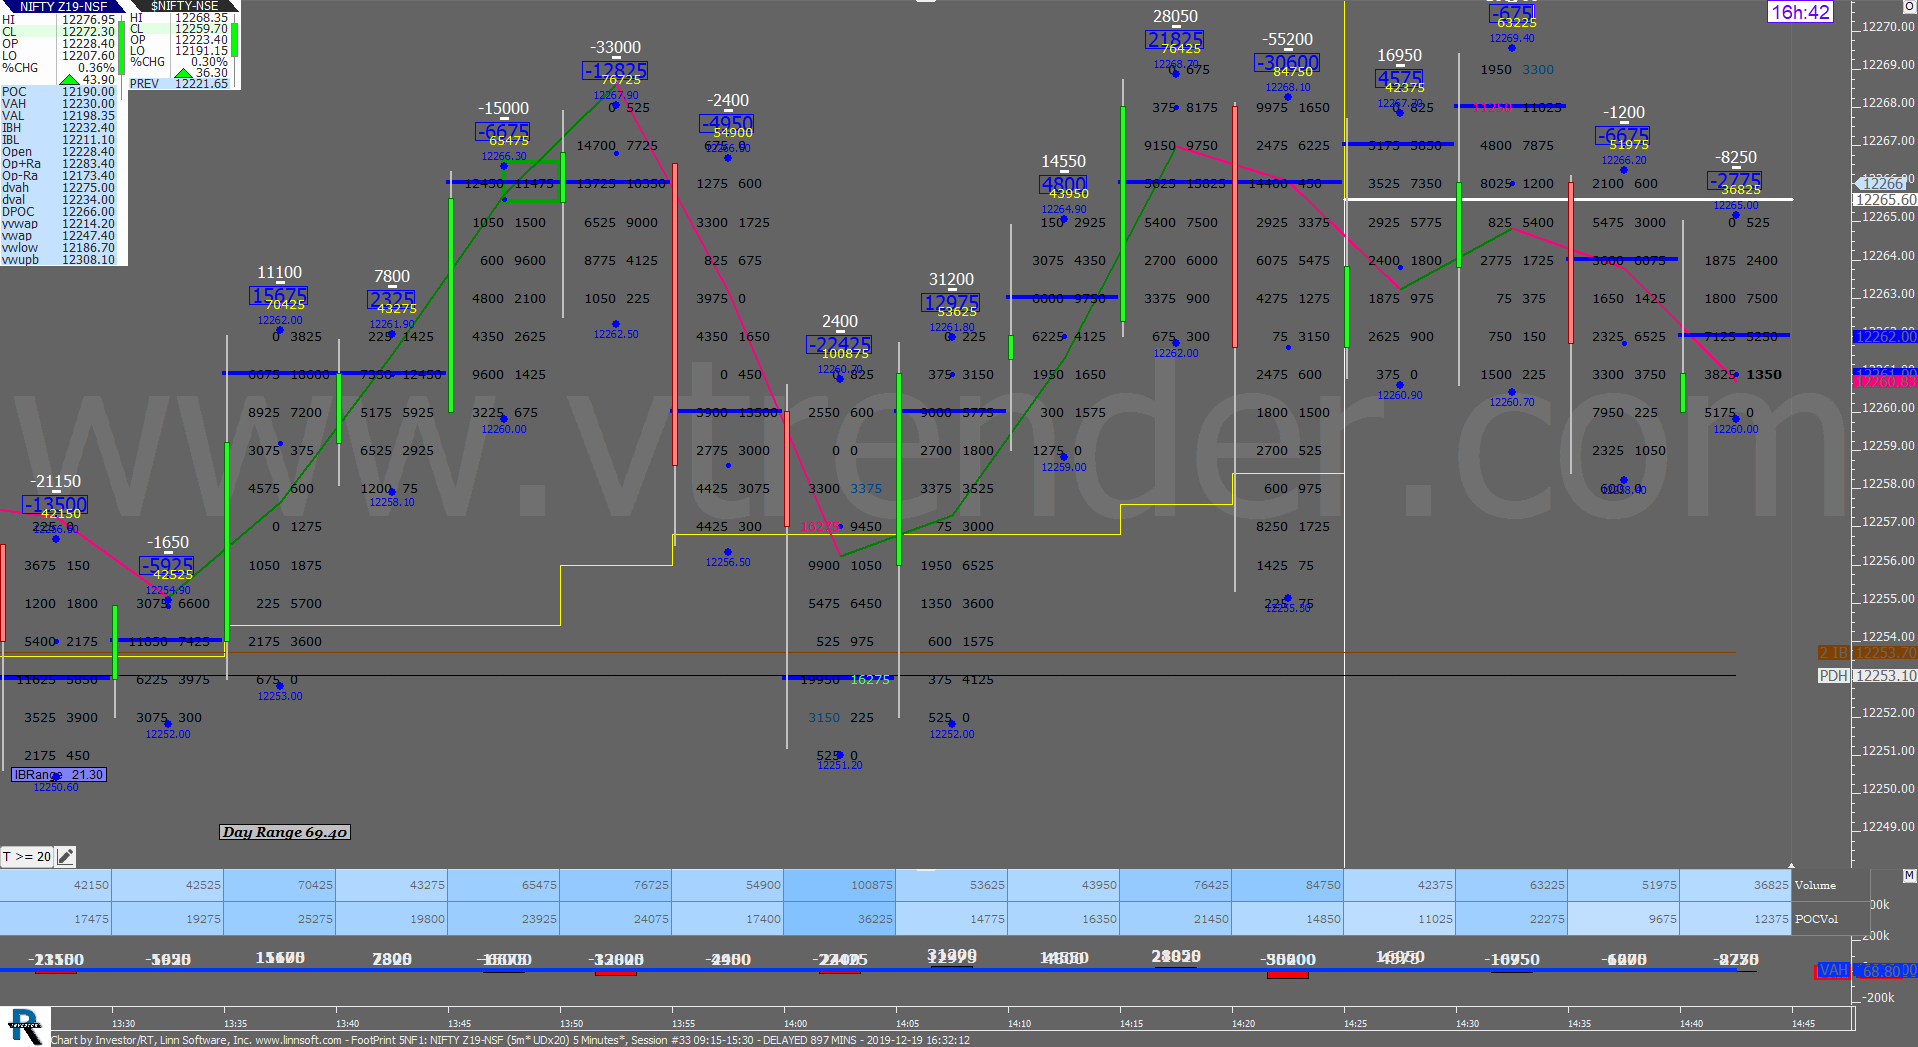 4 26 Order Flow Charts Dated 19Th Dec (5 Mins) Banknifty Futures, Day Trading, Intraday Trading, Intraday Trading Strategies, Nifty Futures, Order Flow Analysis, Support And Resistance, Trading Strategies, Volume Profile Trading